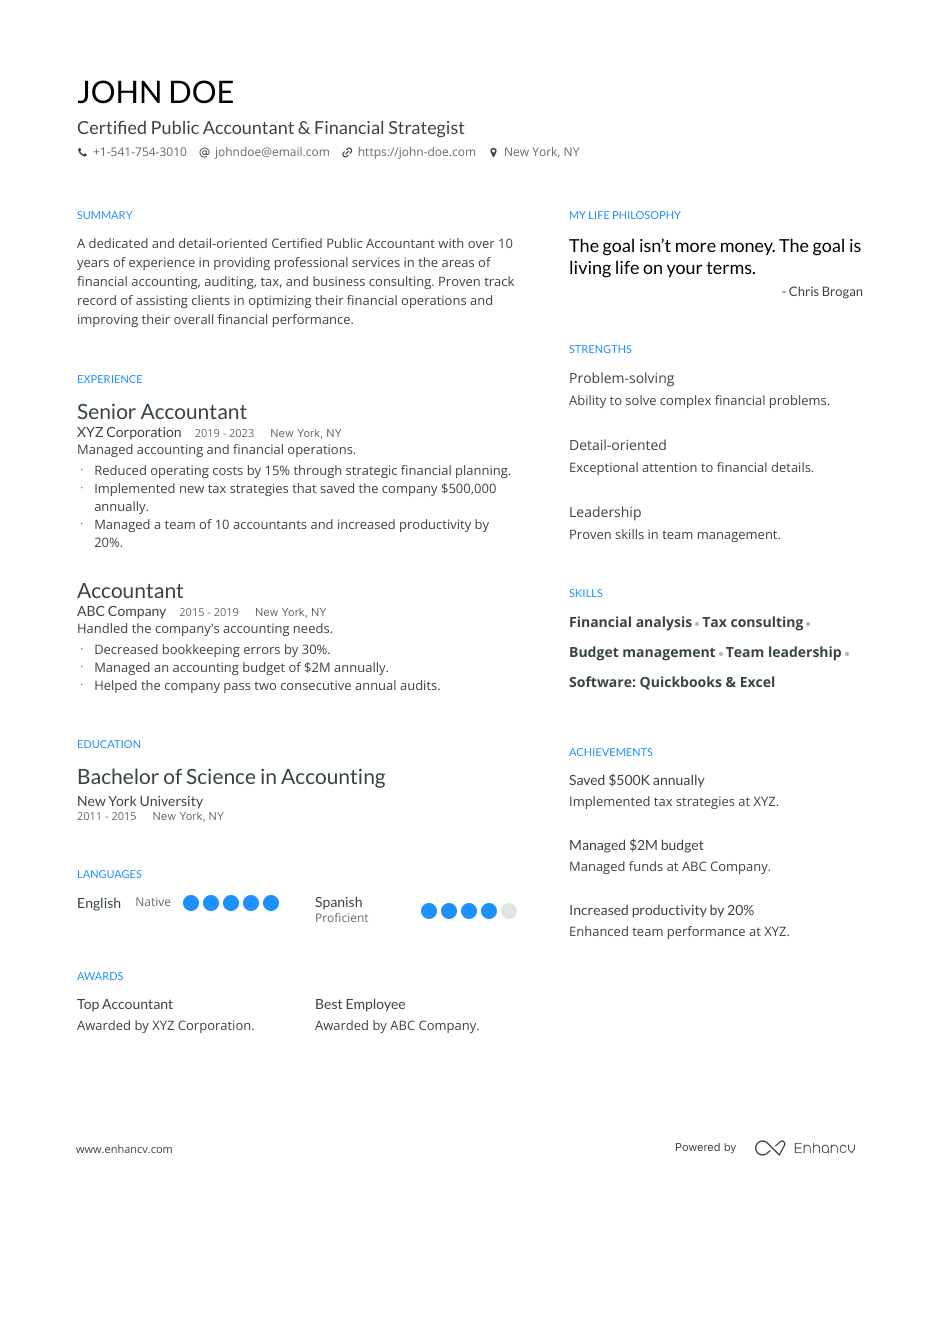 Certified Public Accountant & Financial Strategist resume example